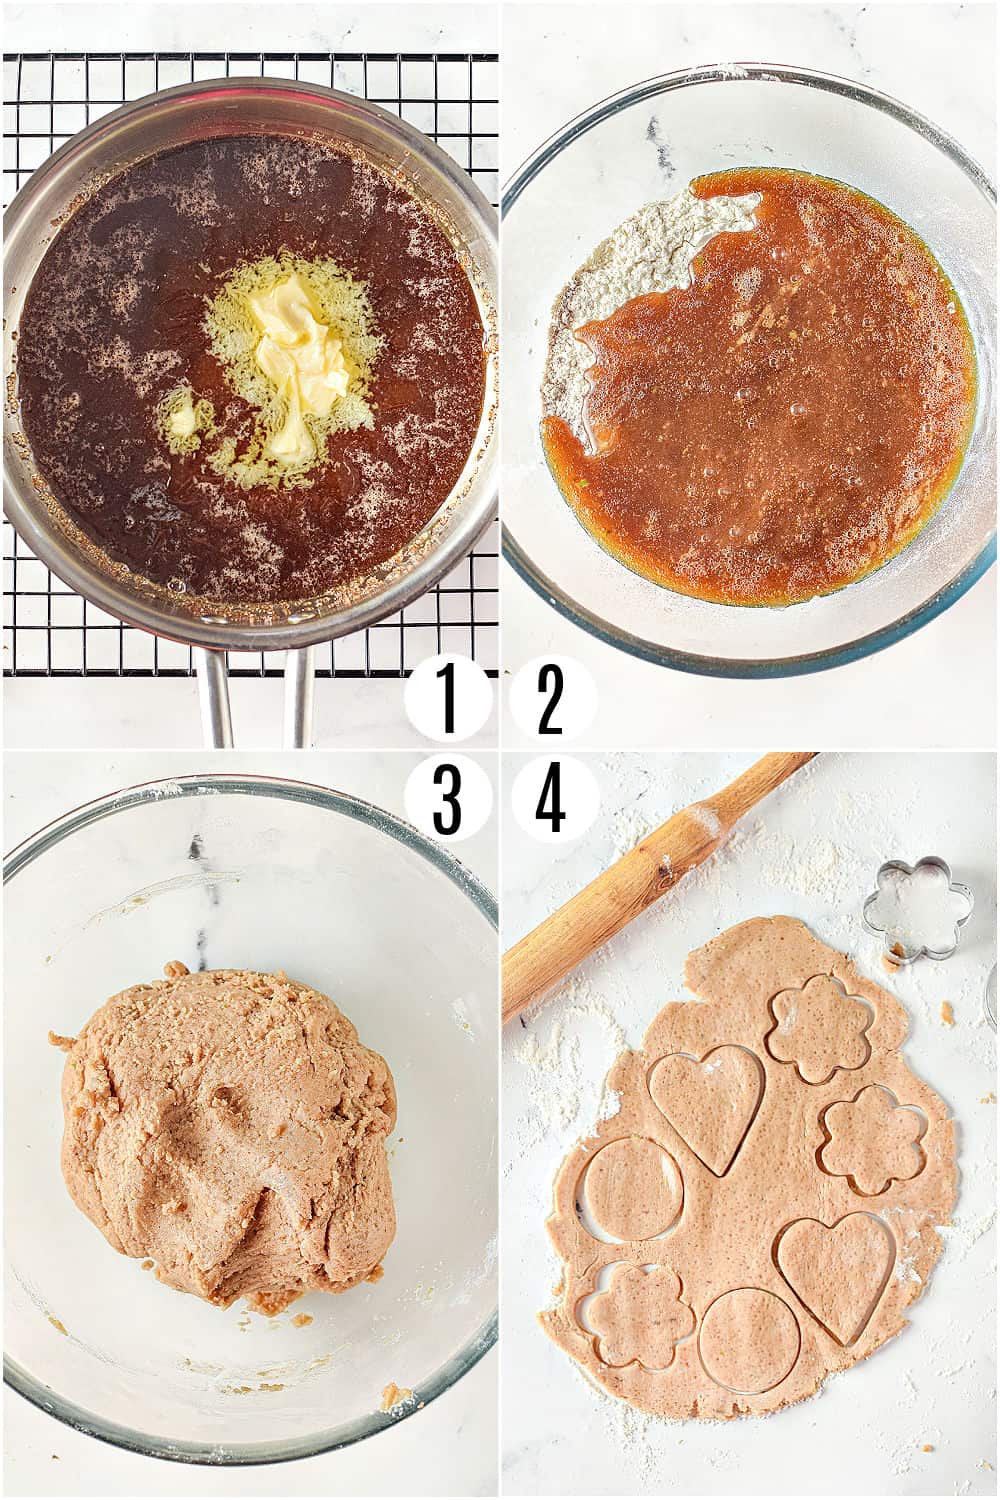 Step by step photos showing how to make lebkuchen cookies.